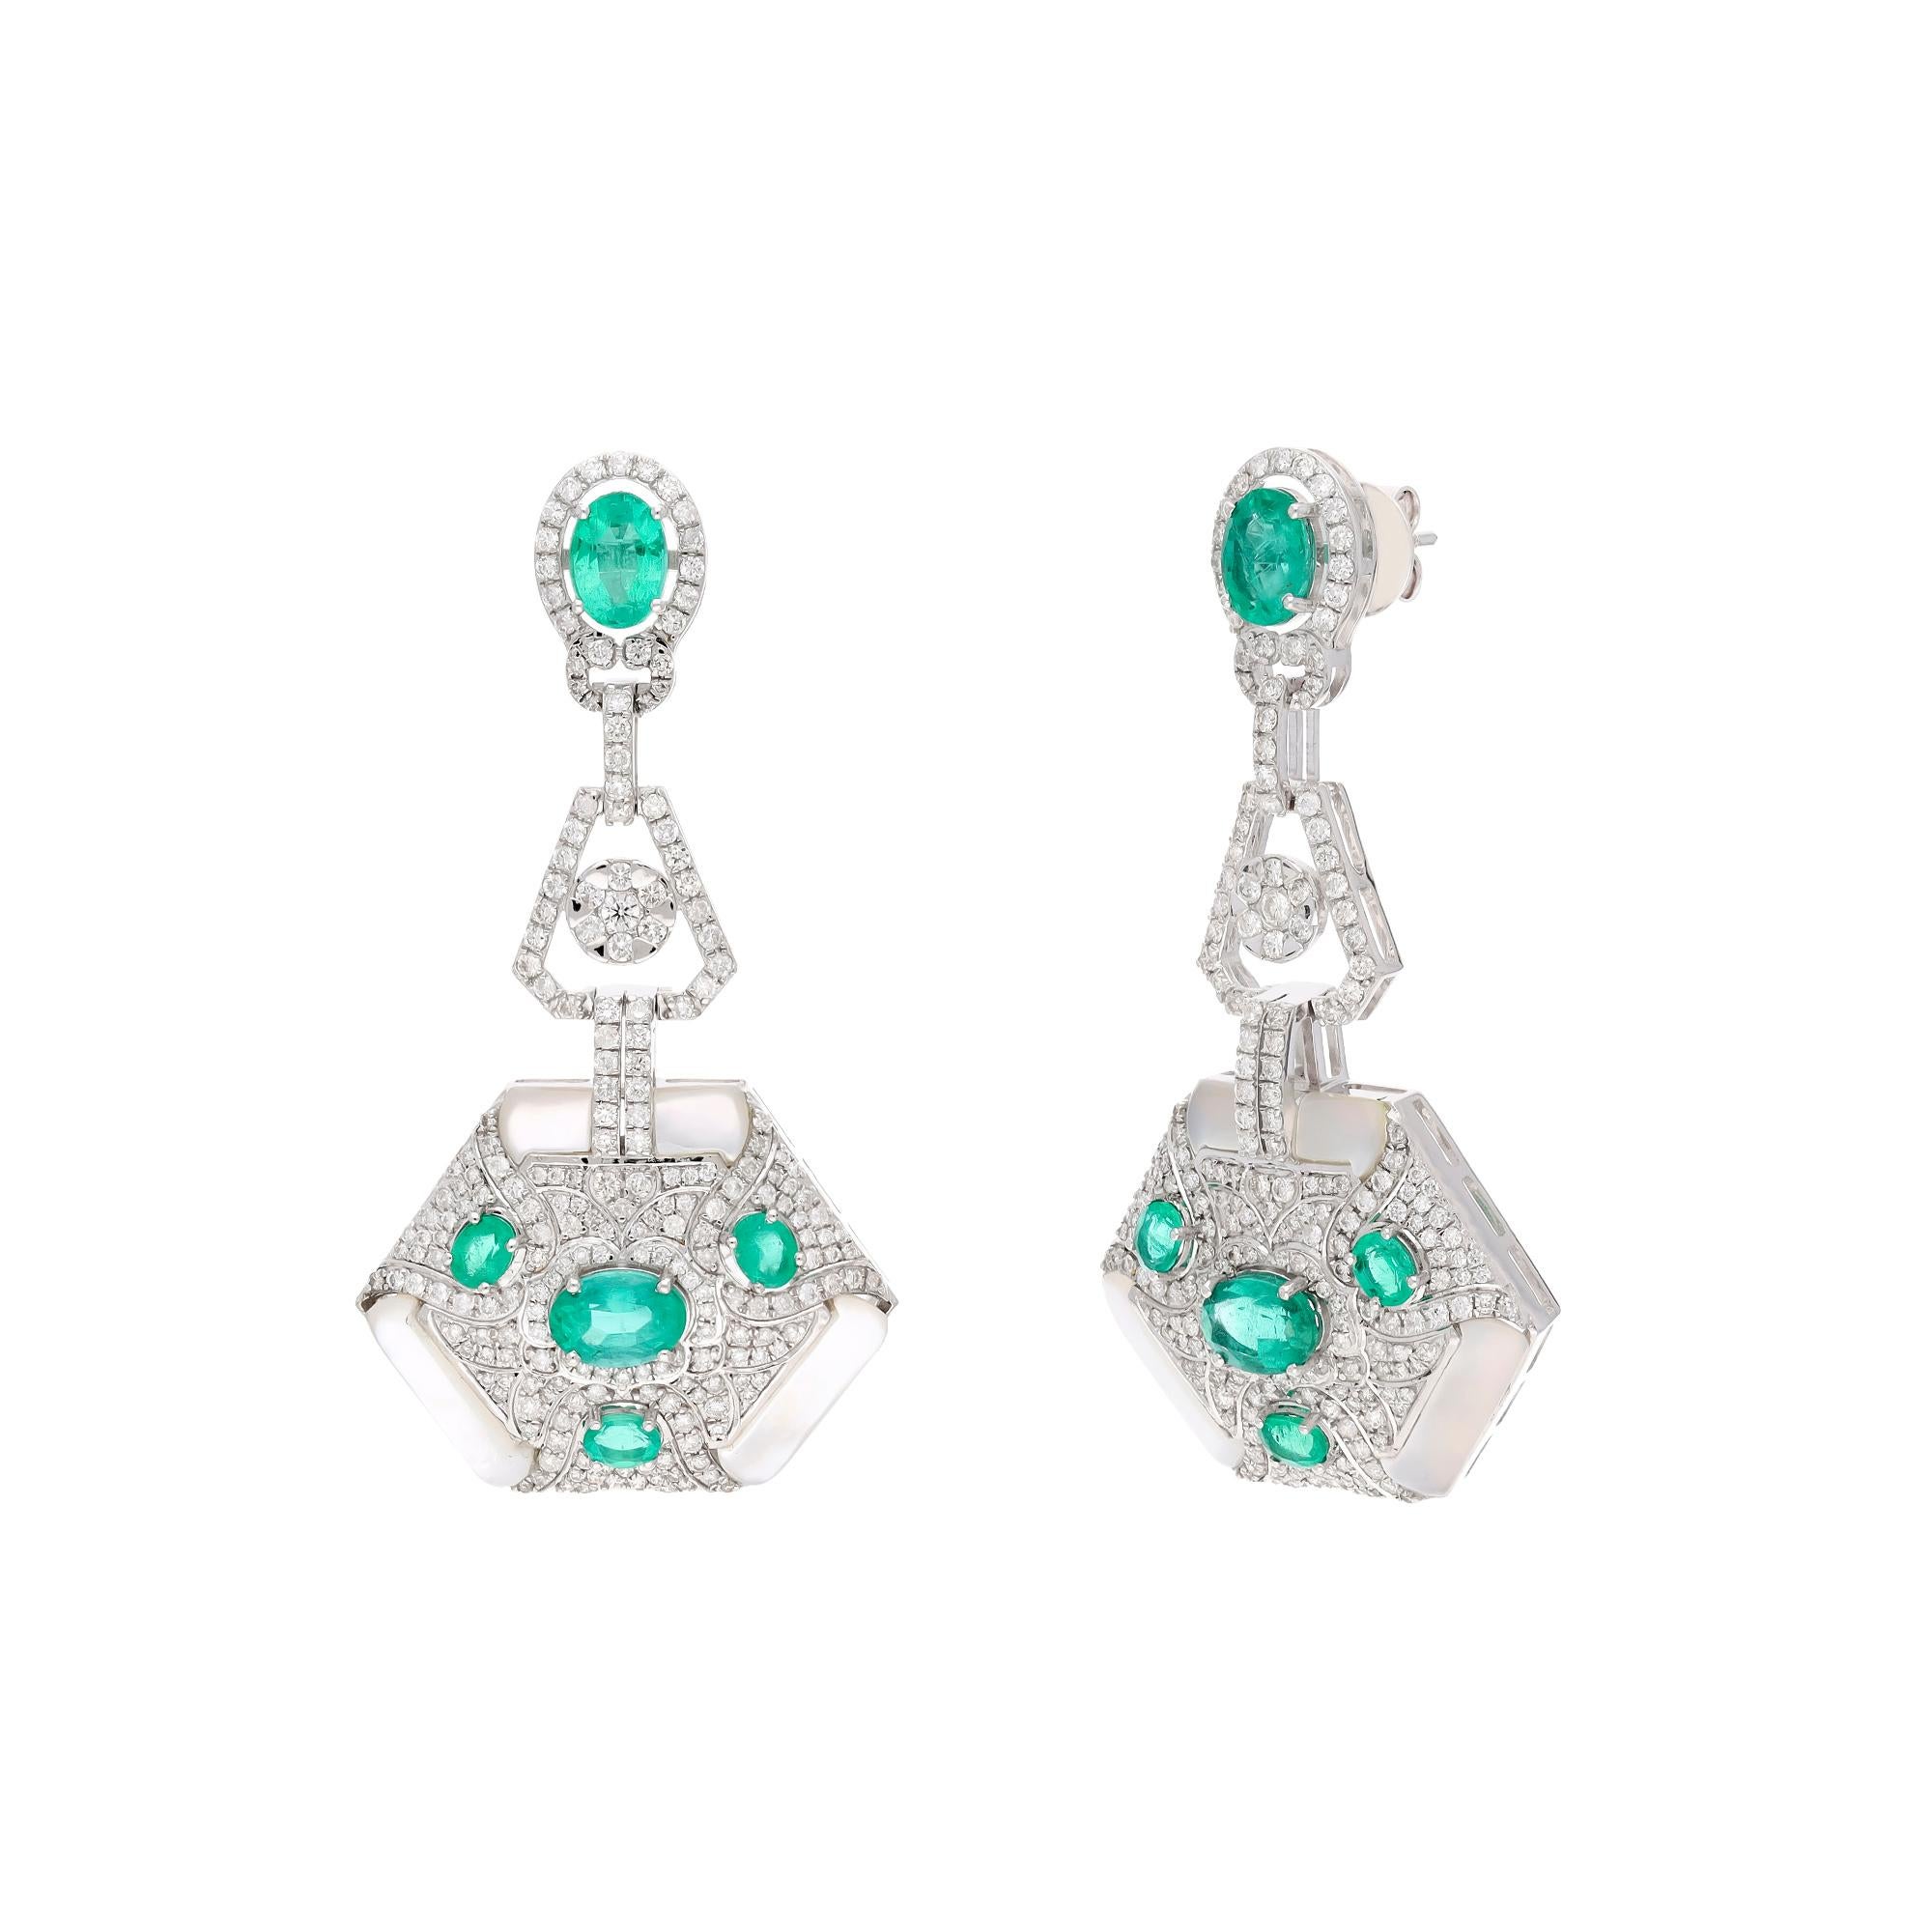 This is a natural Zambian Emerald earring with mop stone & diamonds and 18k gold. The emeralds are very high quality and very good quality diamonds the clarity is vsi and G colour


Emeralds : 4.23 carats
mop stone :3.95 carats
diamonds : 2.91